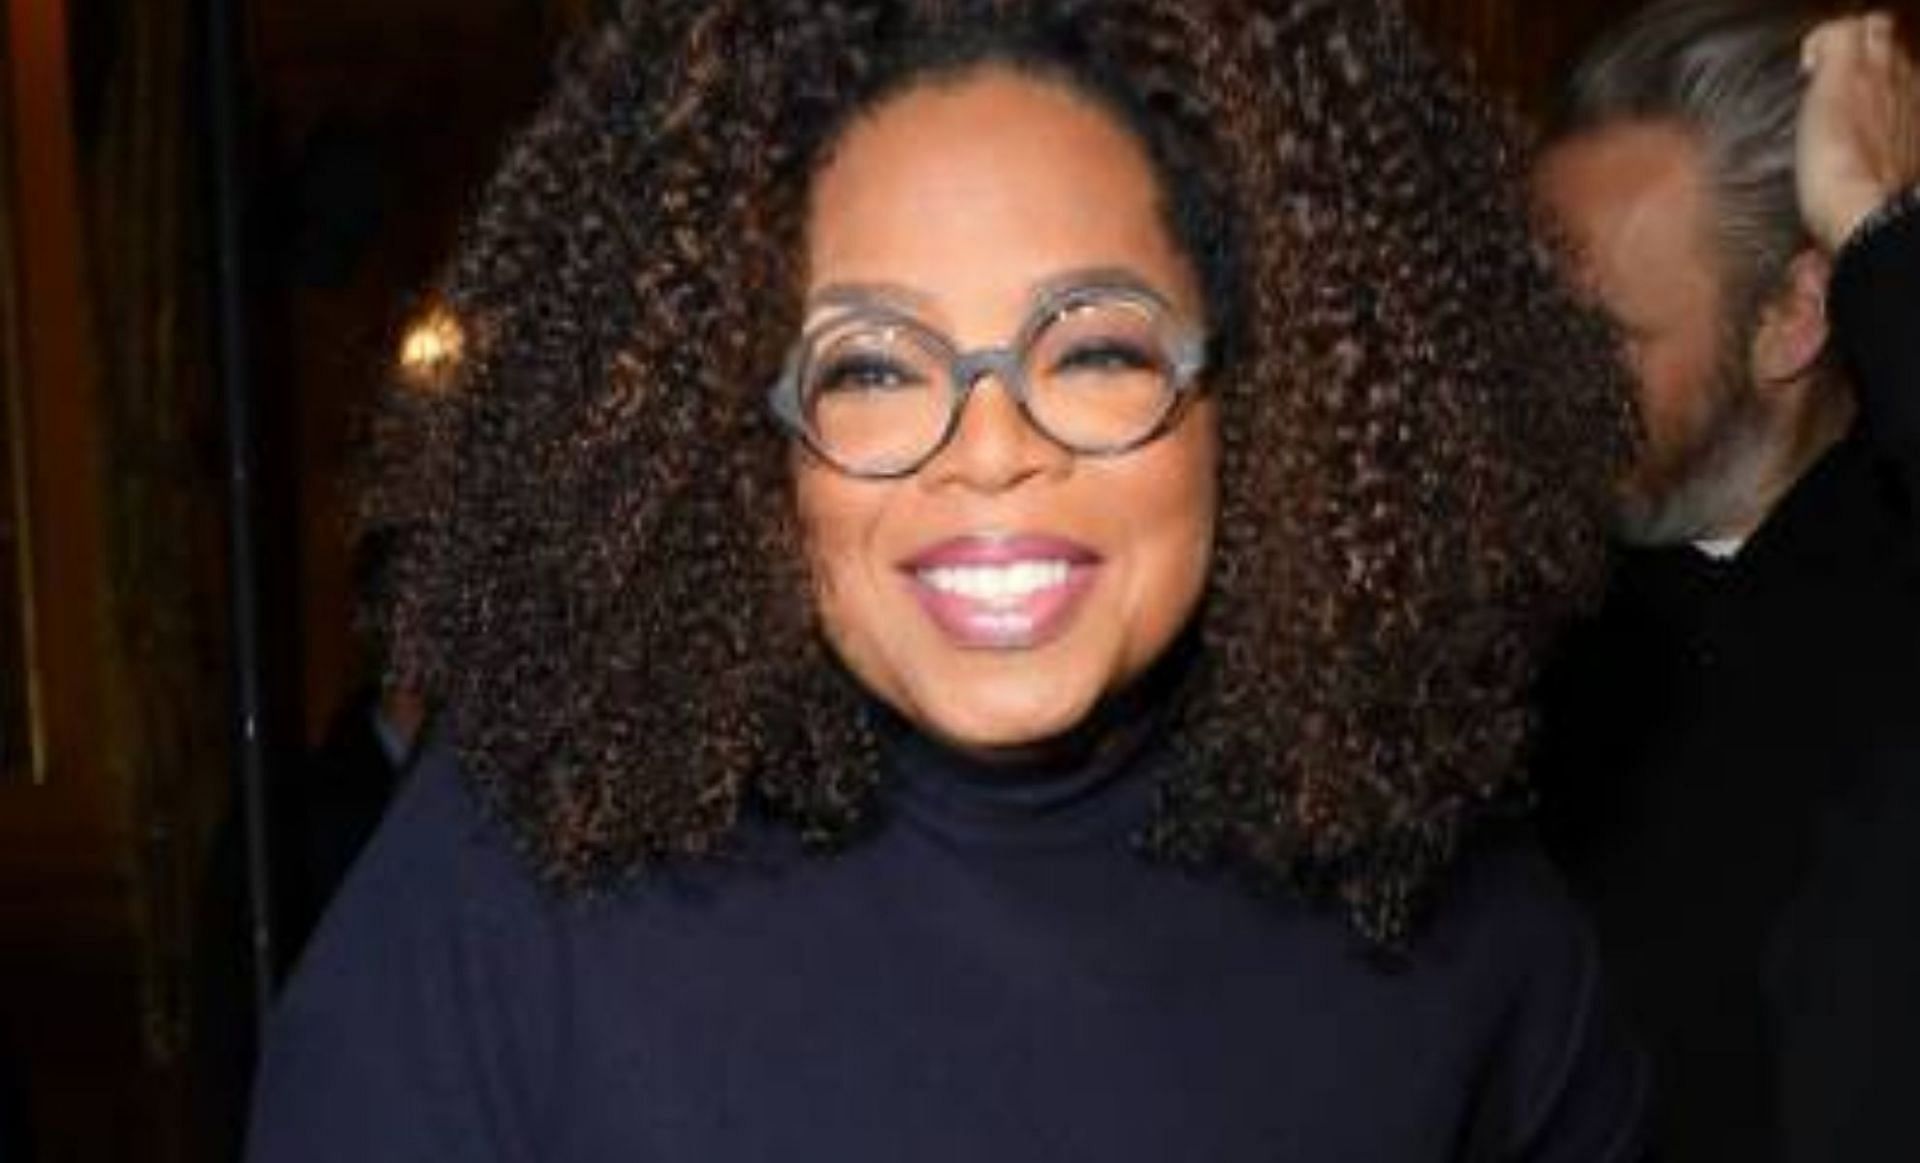 Oprah Winfrey set strict holiday rules, keeping COVID in mind (Image via Getty Images)